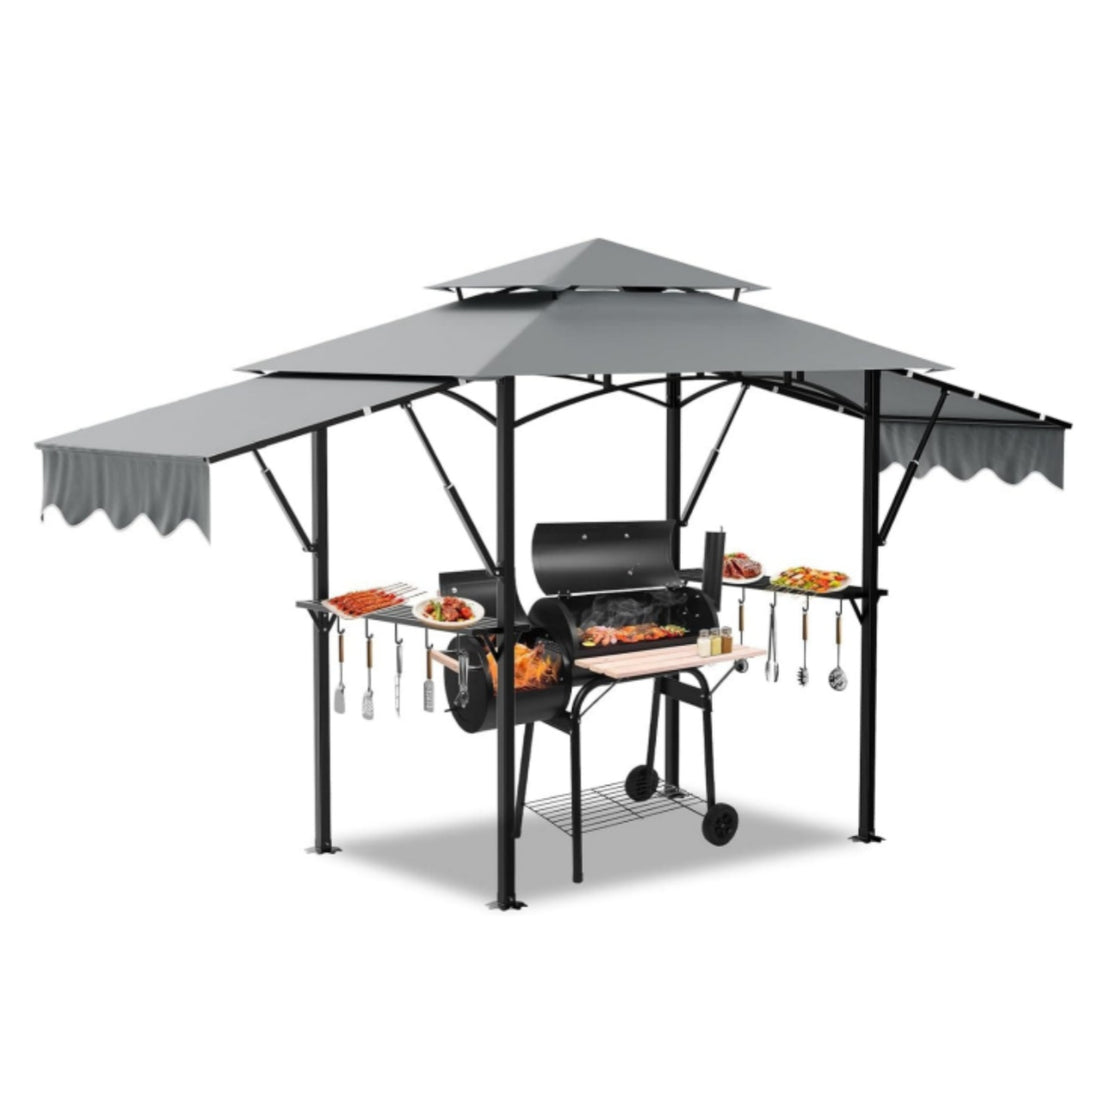 8x5FT Double Tiered Grill Gazebo, Outdoor BBQ Gazebo Shelter with LED Light & Extra Shadow for Barbecue and Picnic, Grey